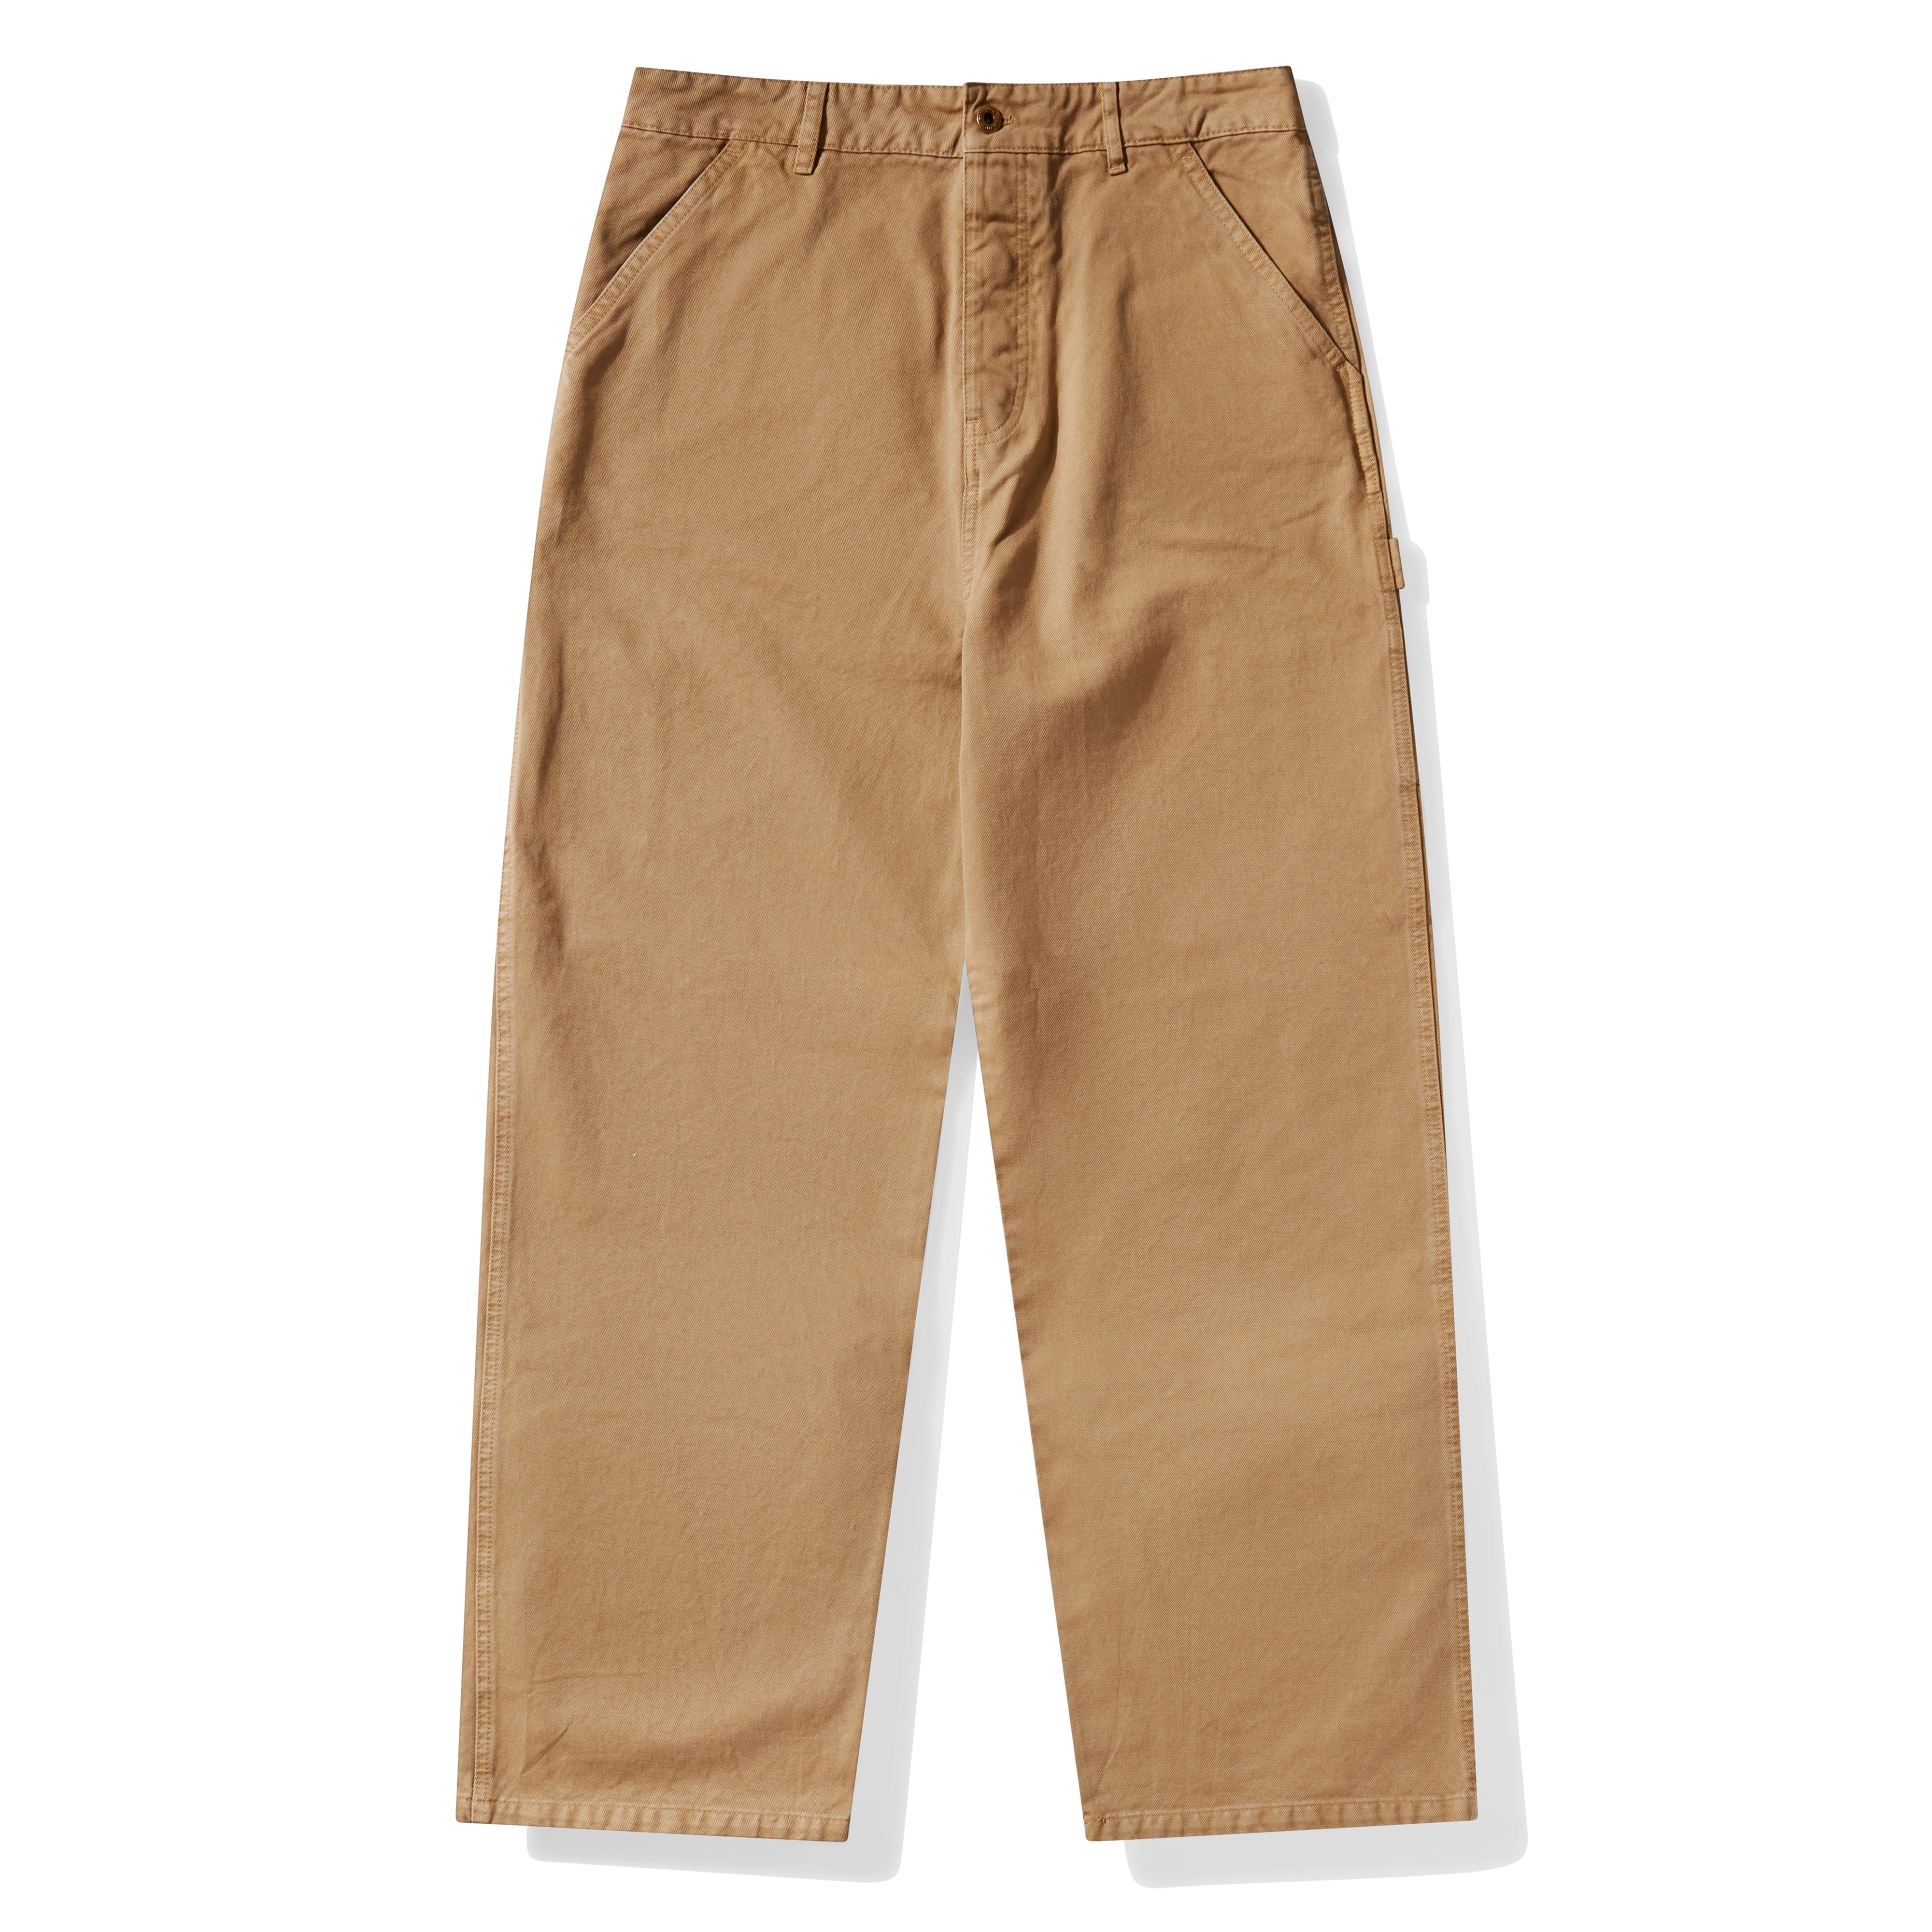 Corduroy trousers - Trousers - Clothing